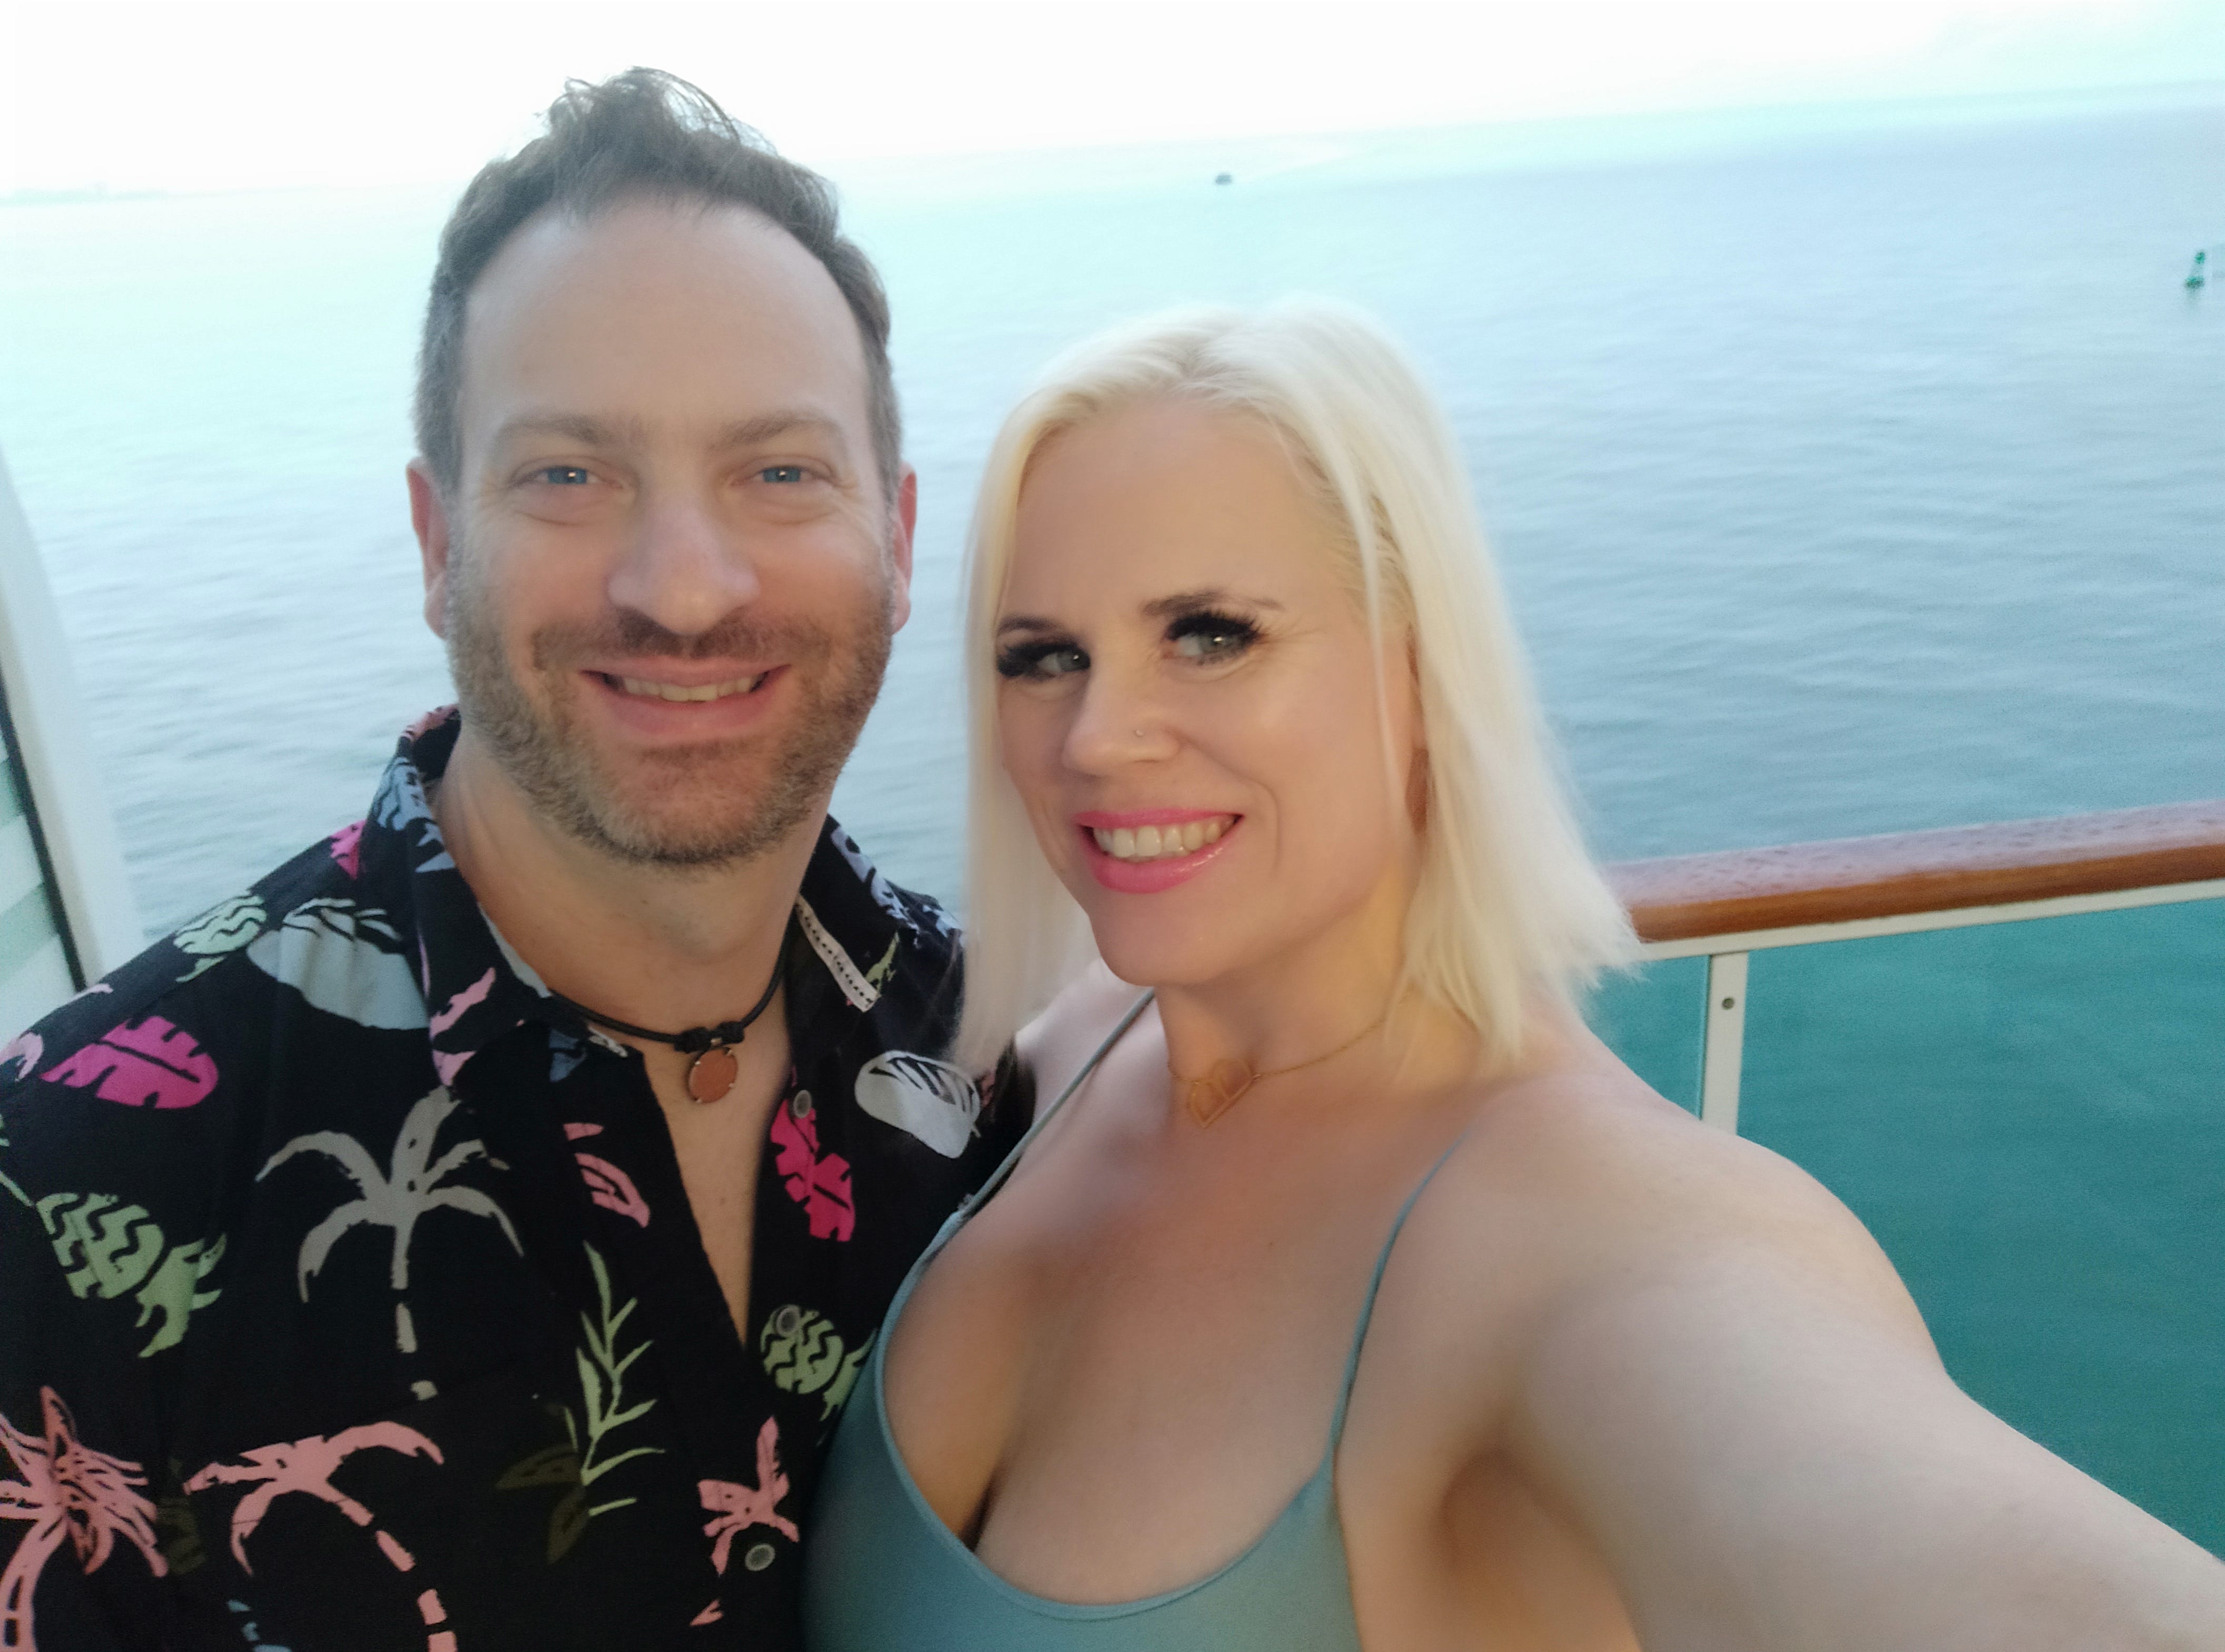 Cruises are a popular place for swingers to lower their inhibitions pic